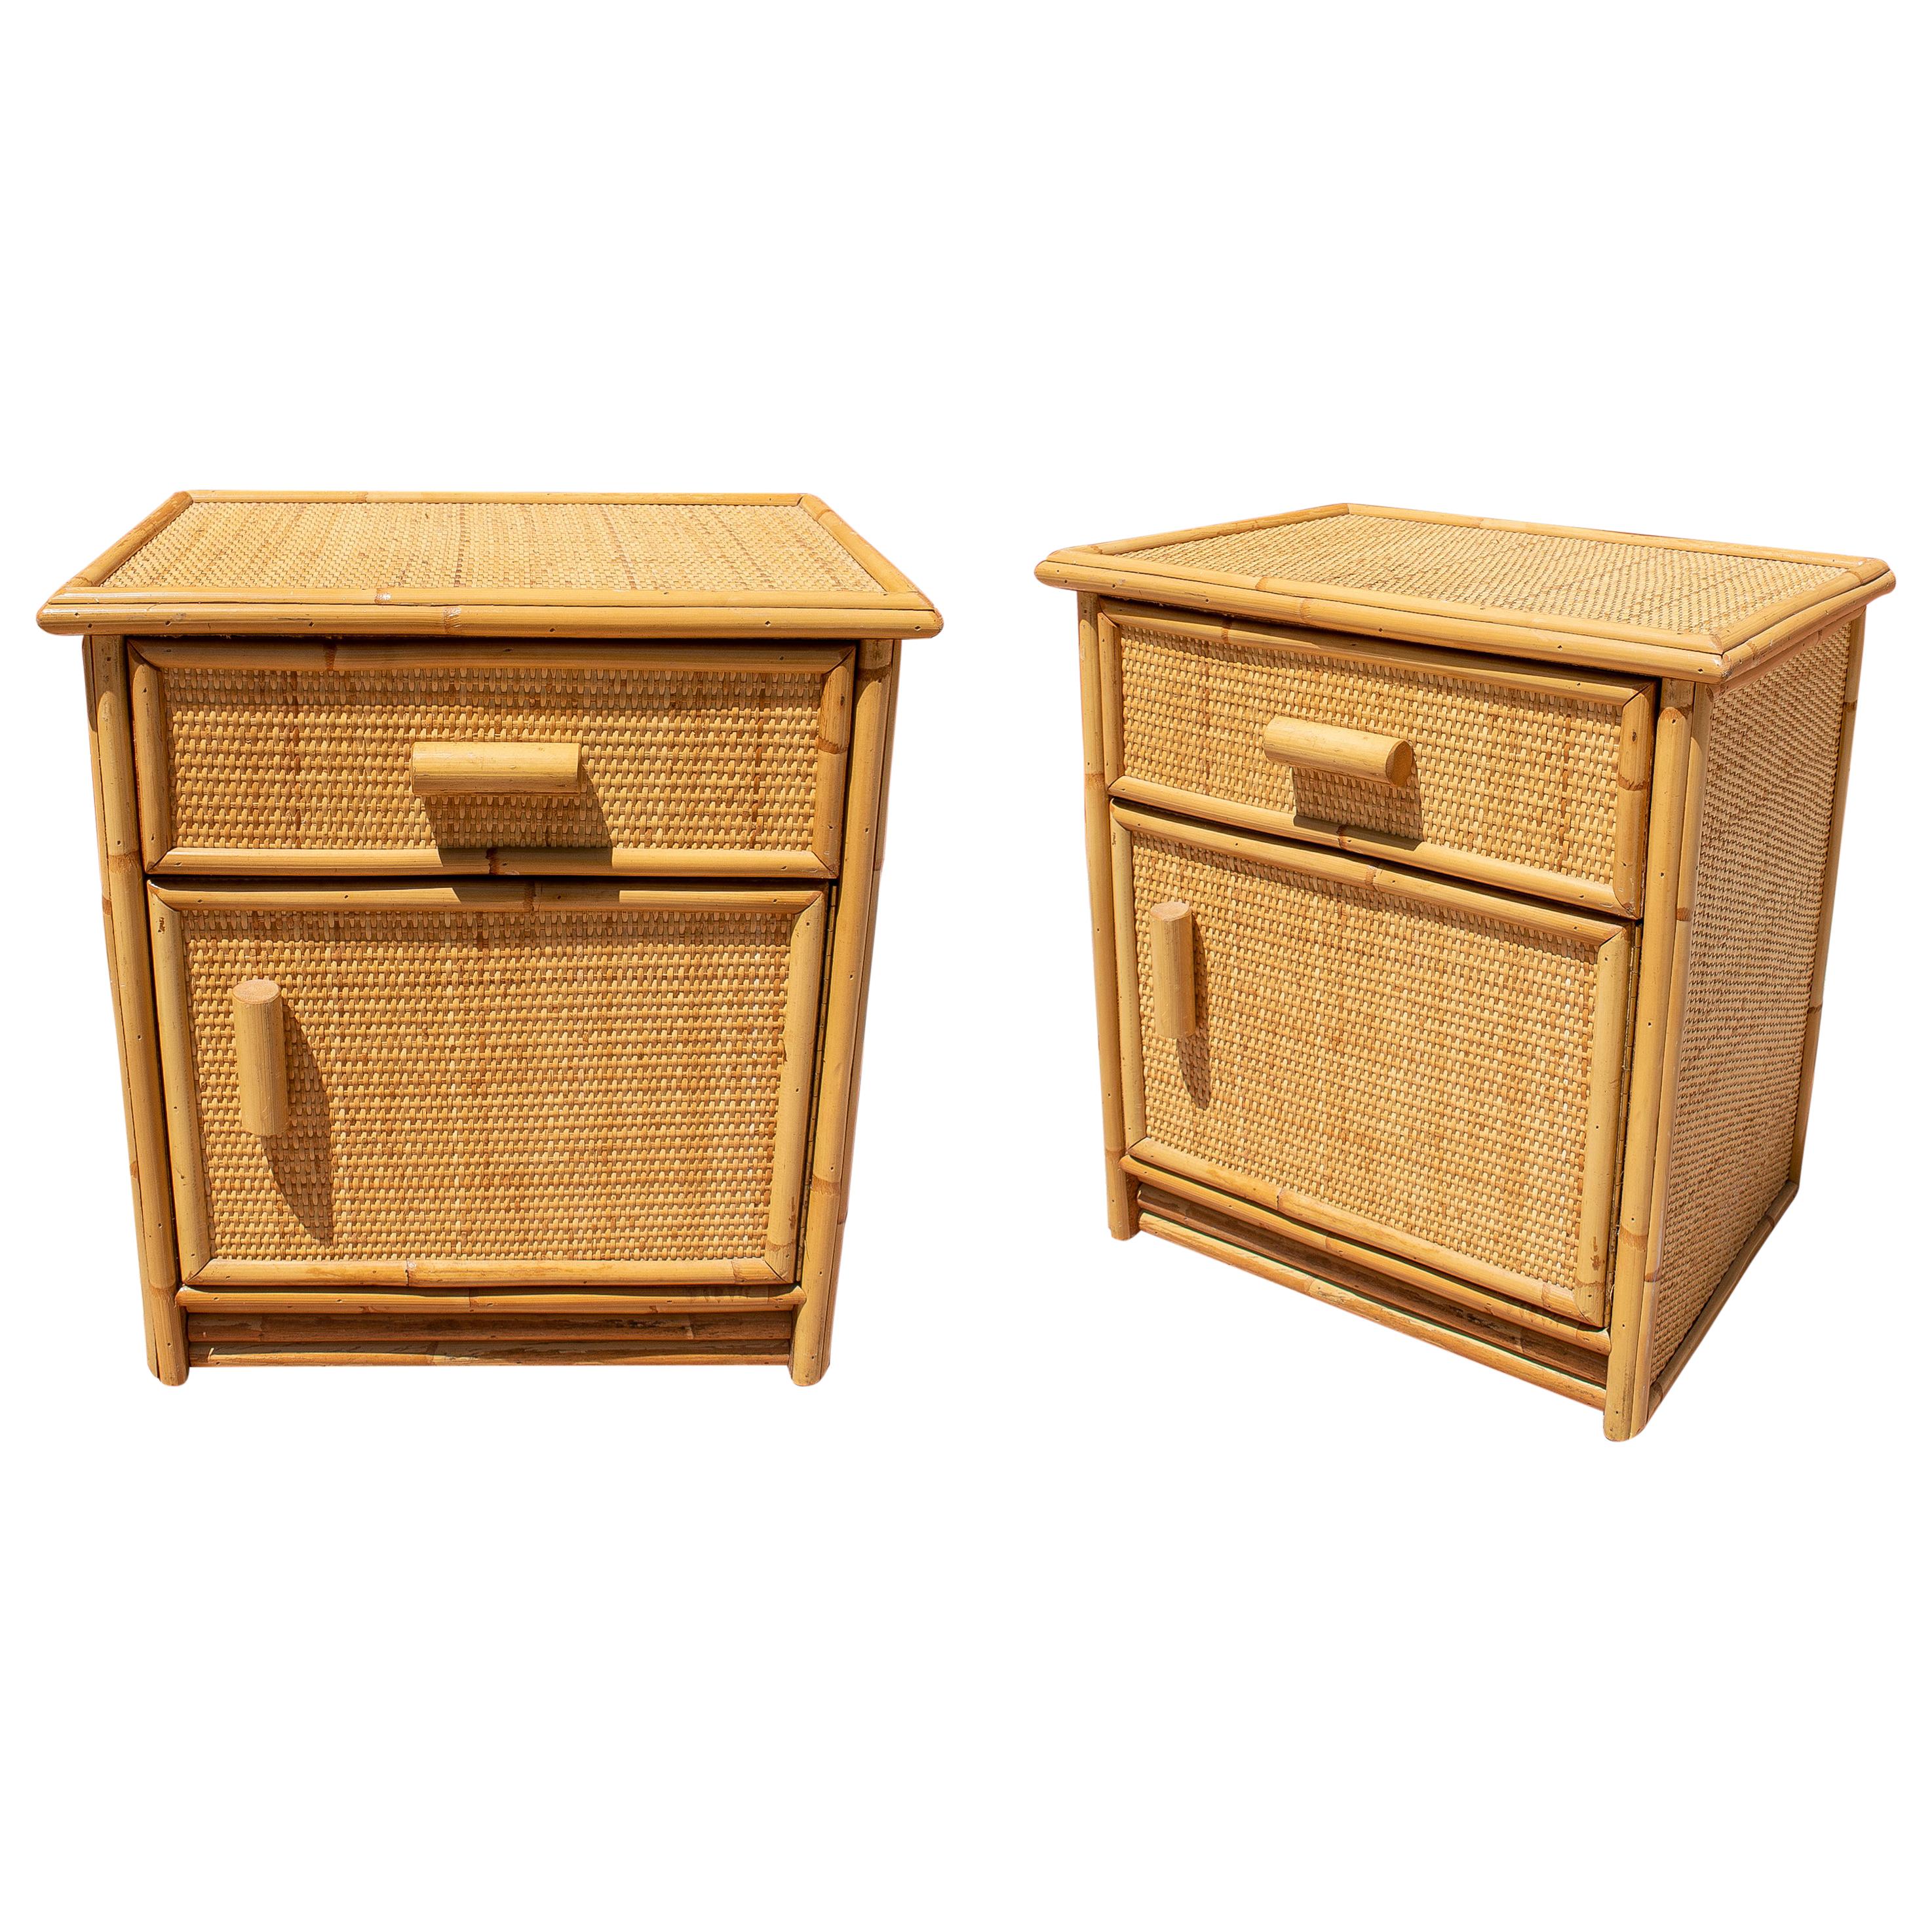 Pair of 1970s Spanish Lace Wicker and Bamboo 1-Drawer & 1-Door Bedside Tables For Sale